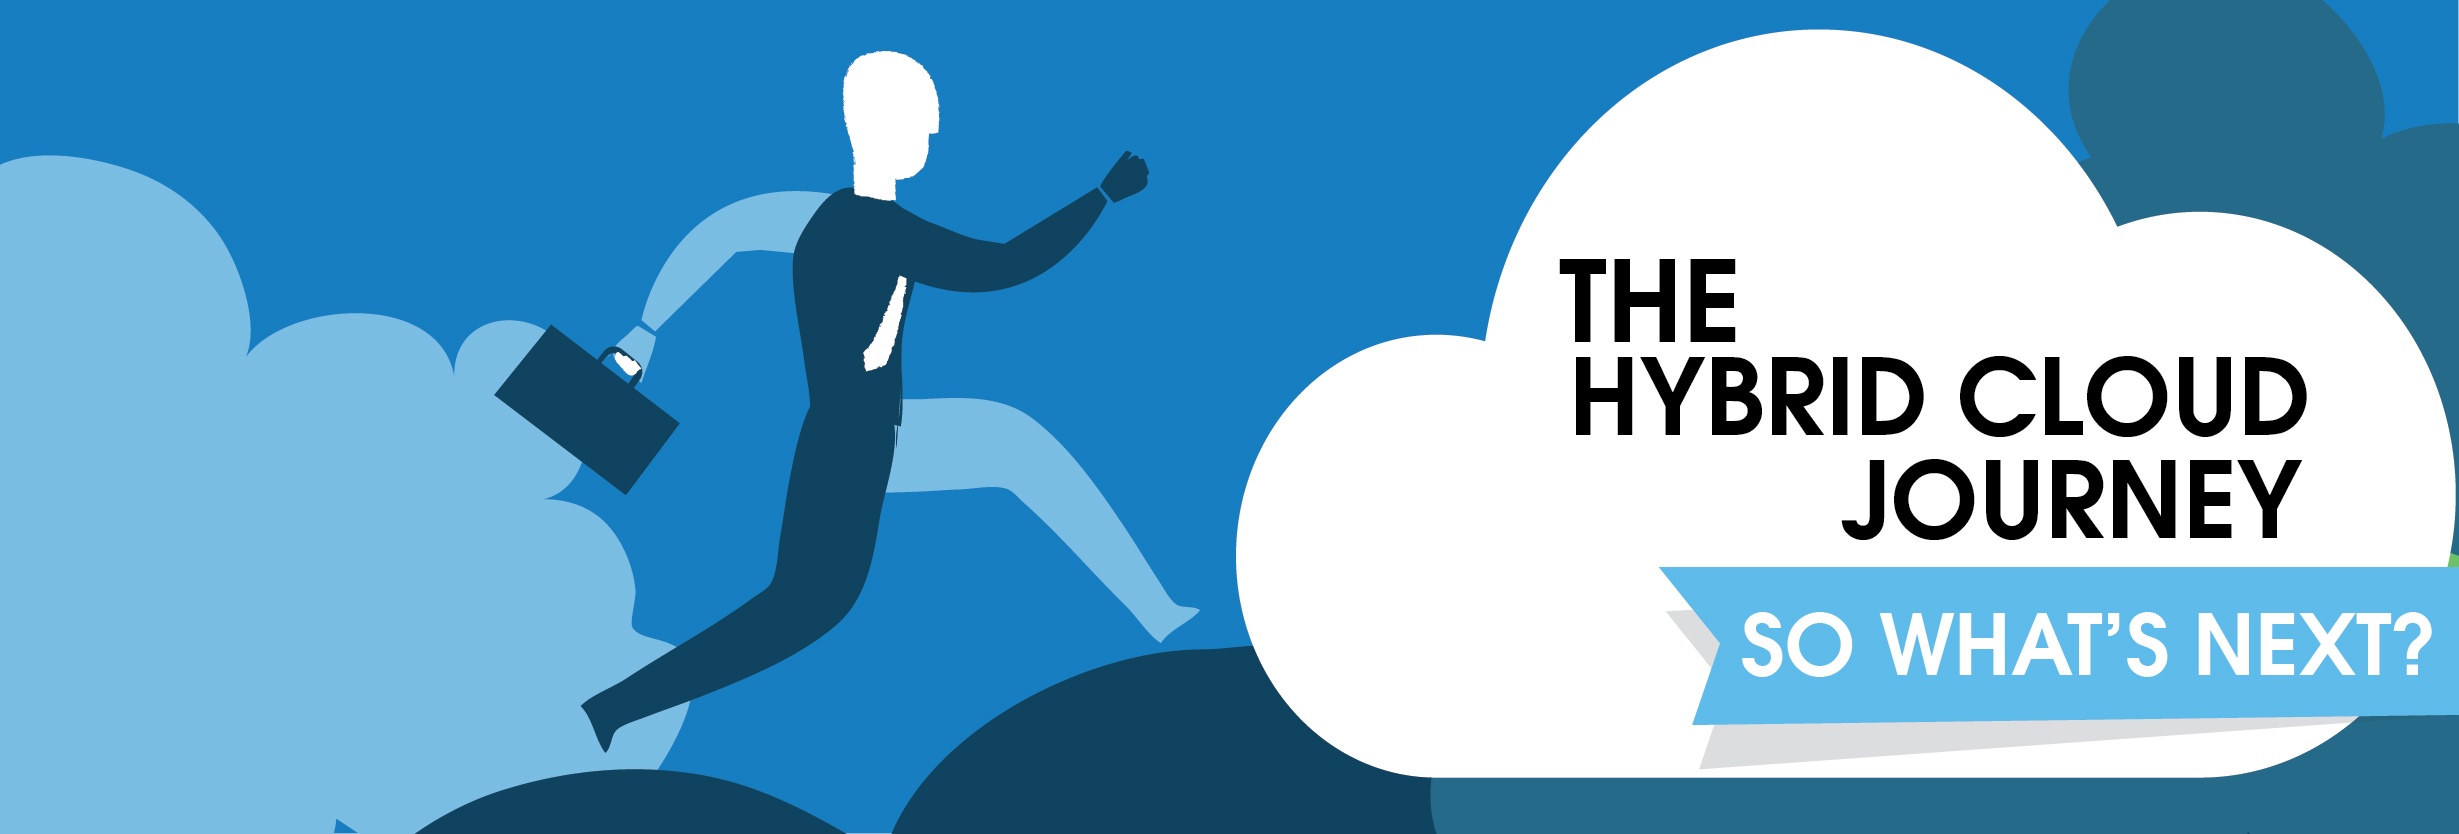 The Hybrid Cloud Journey: So What’s Next? (Part 2 of 2)